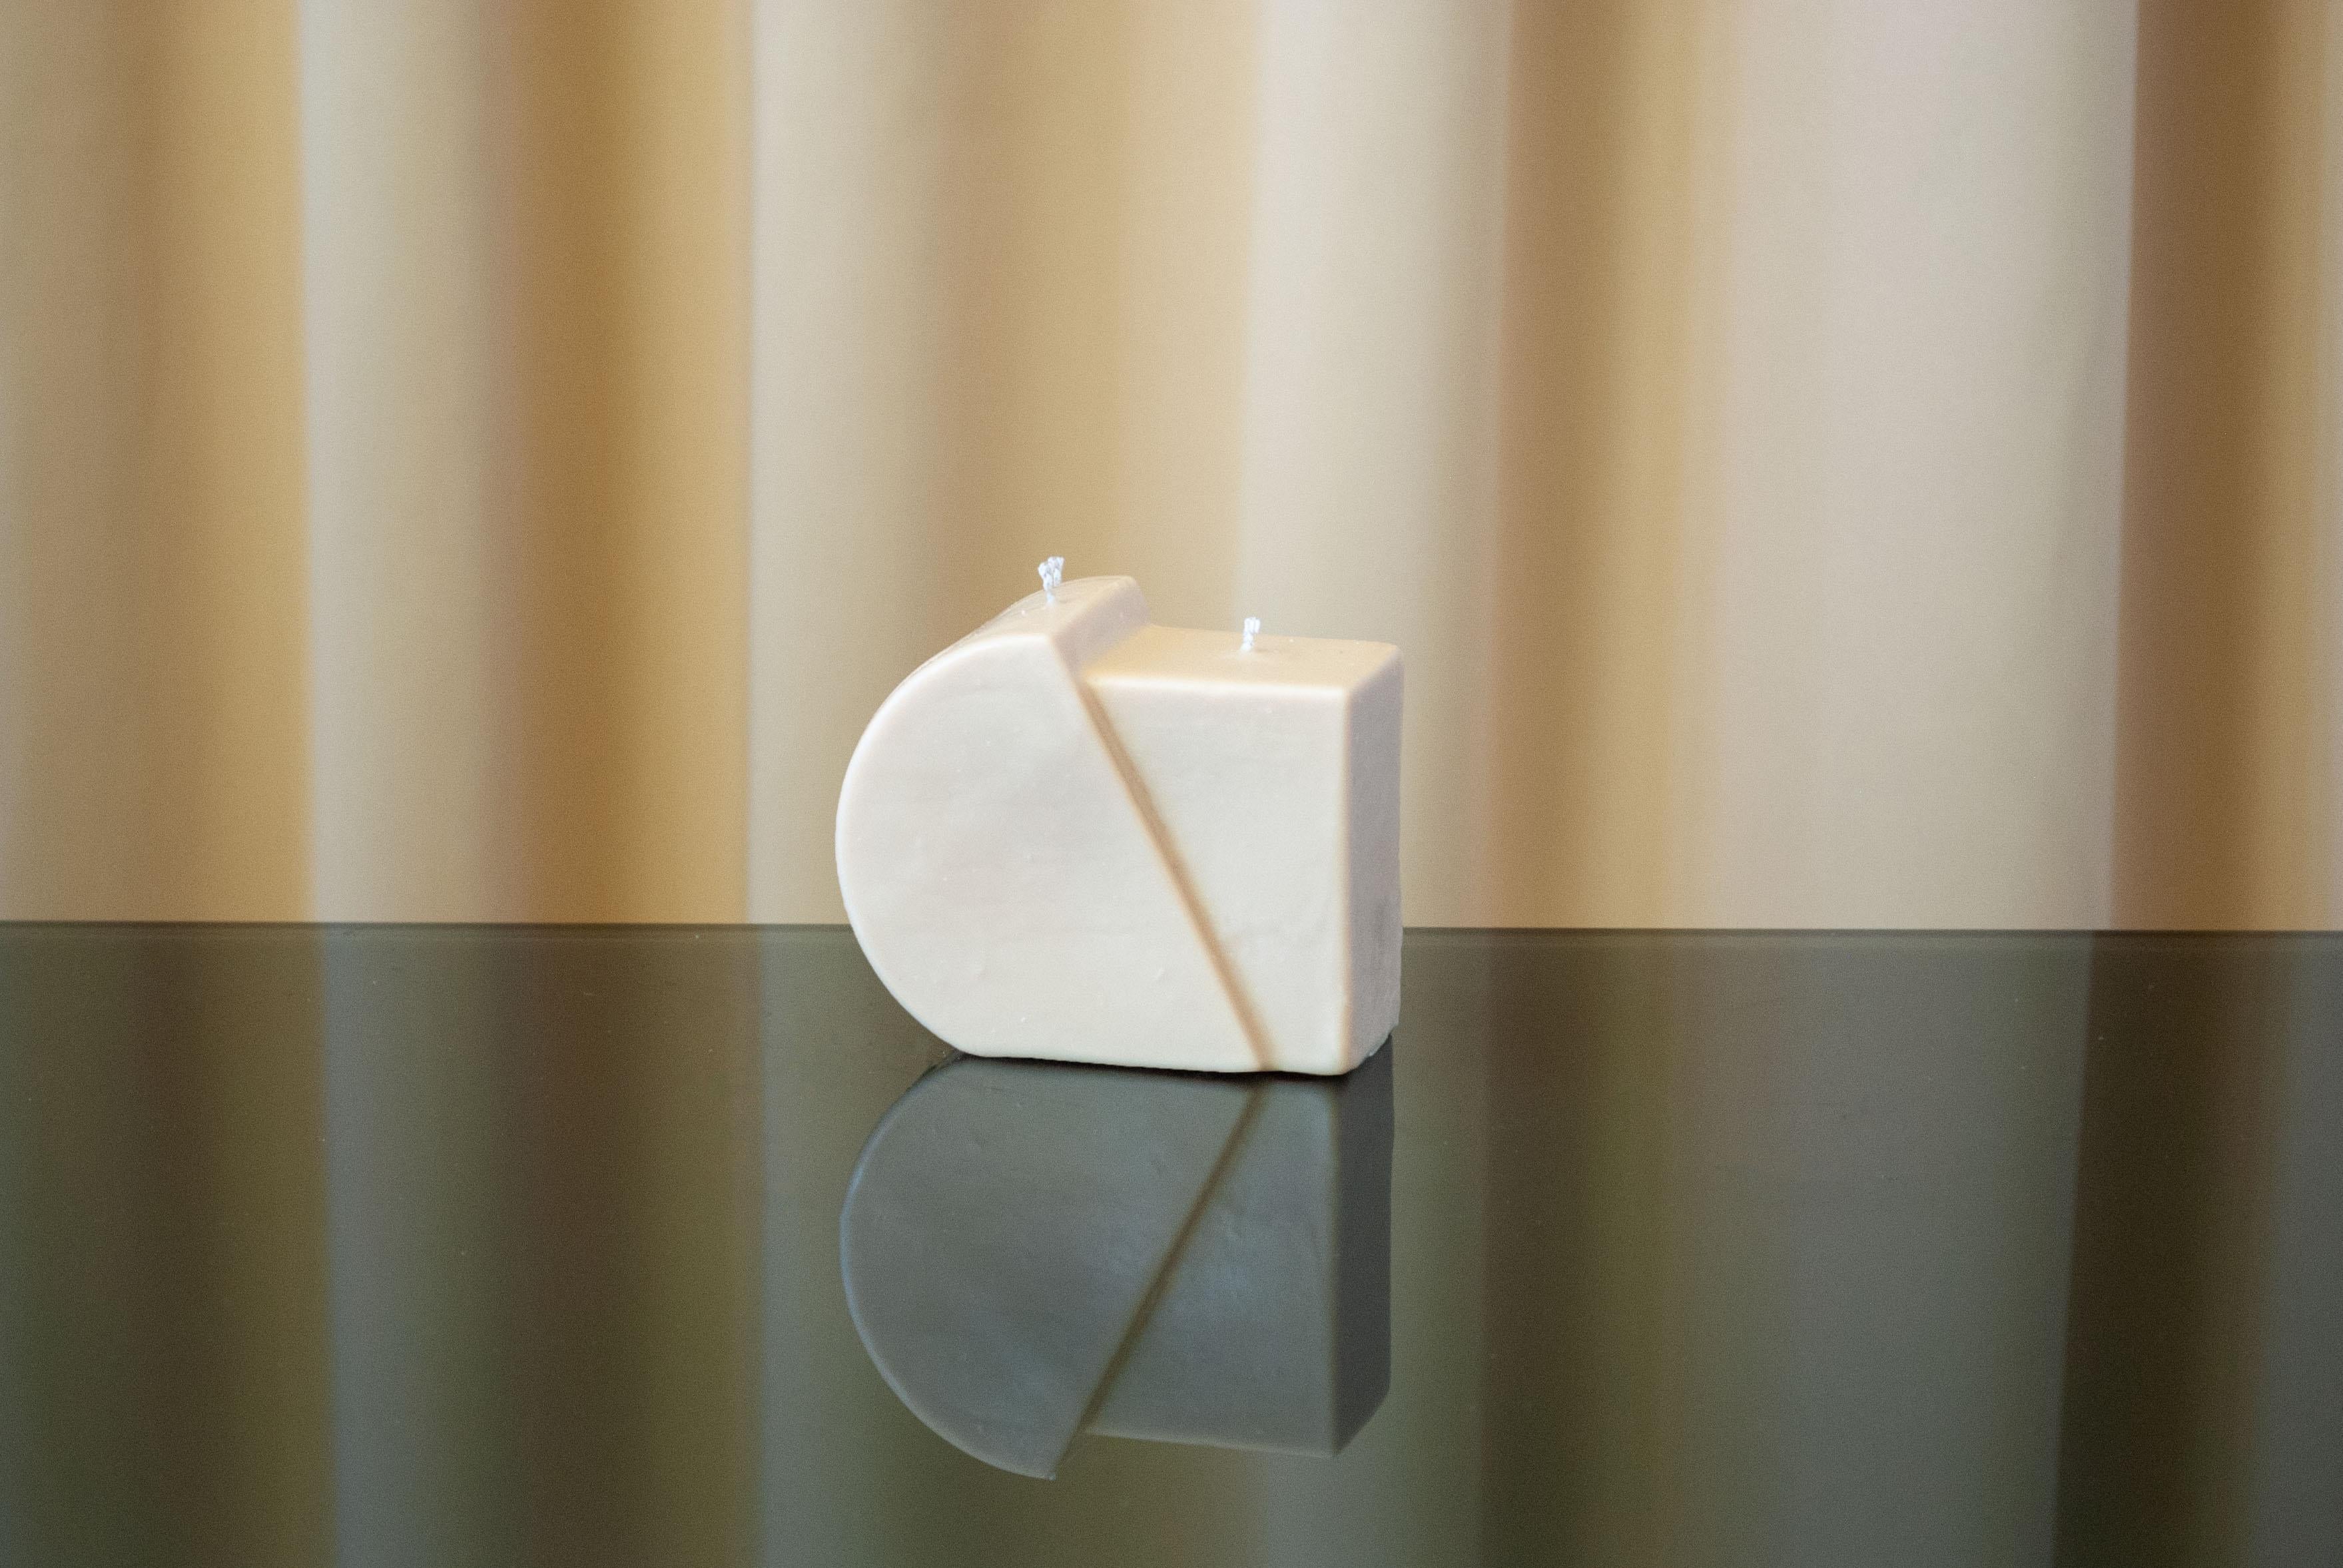 Batch no.1

Limited edition

Intersecting candles are a family of three two-wick candles, each consisting of two intersected shapes. The shapes are informed by Theodora's previous mould studies and celebrate a merger of geometric